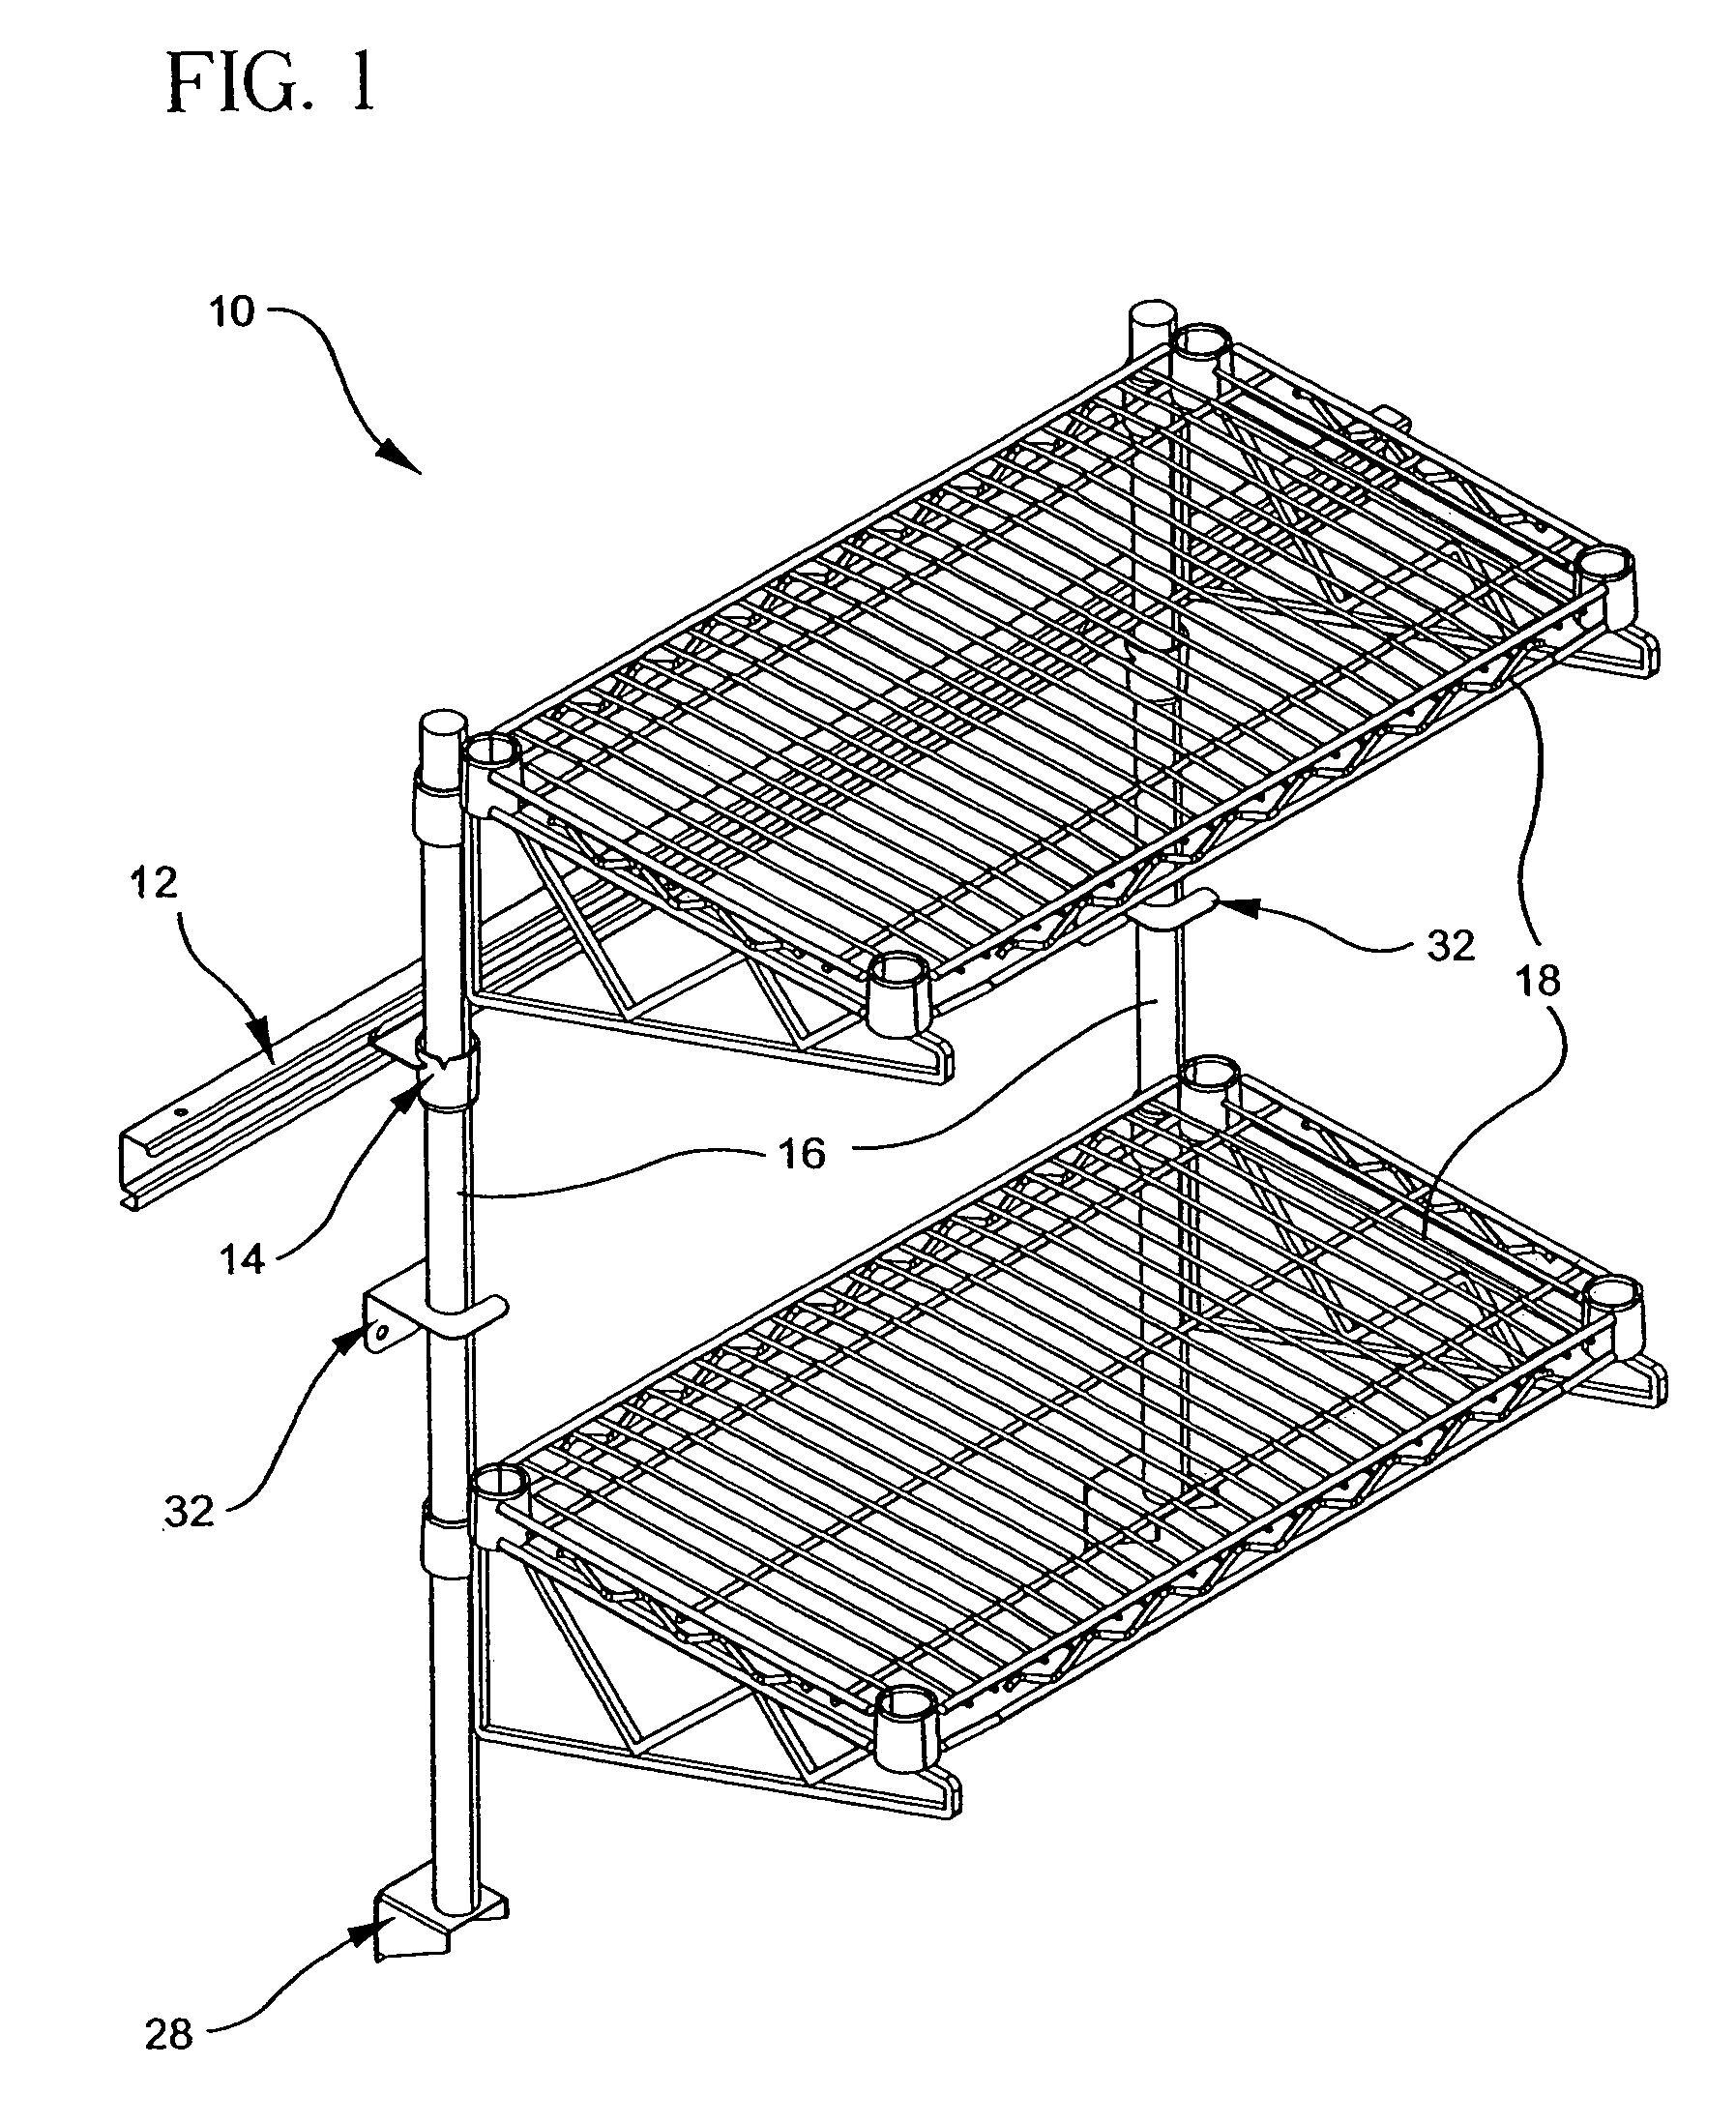 Wall-mounted shelving system